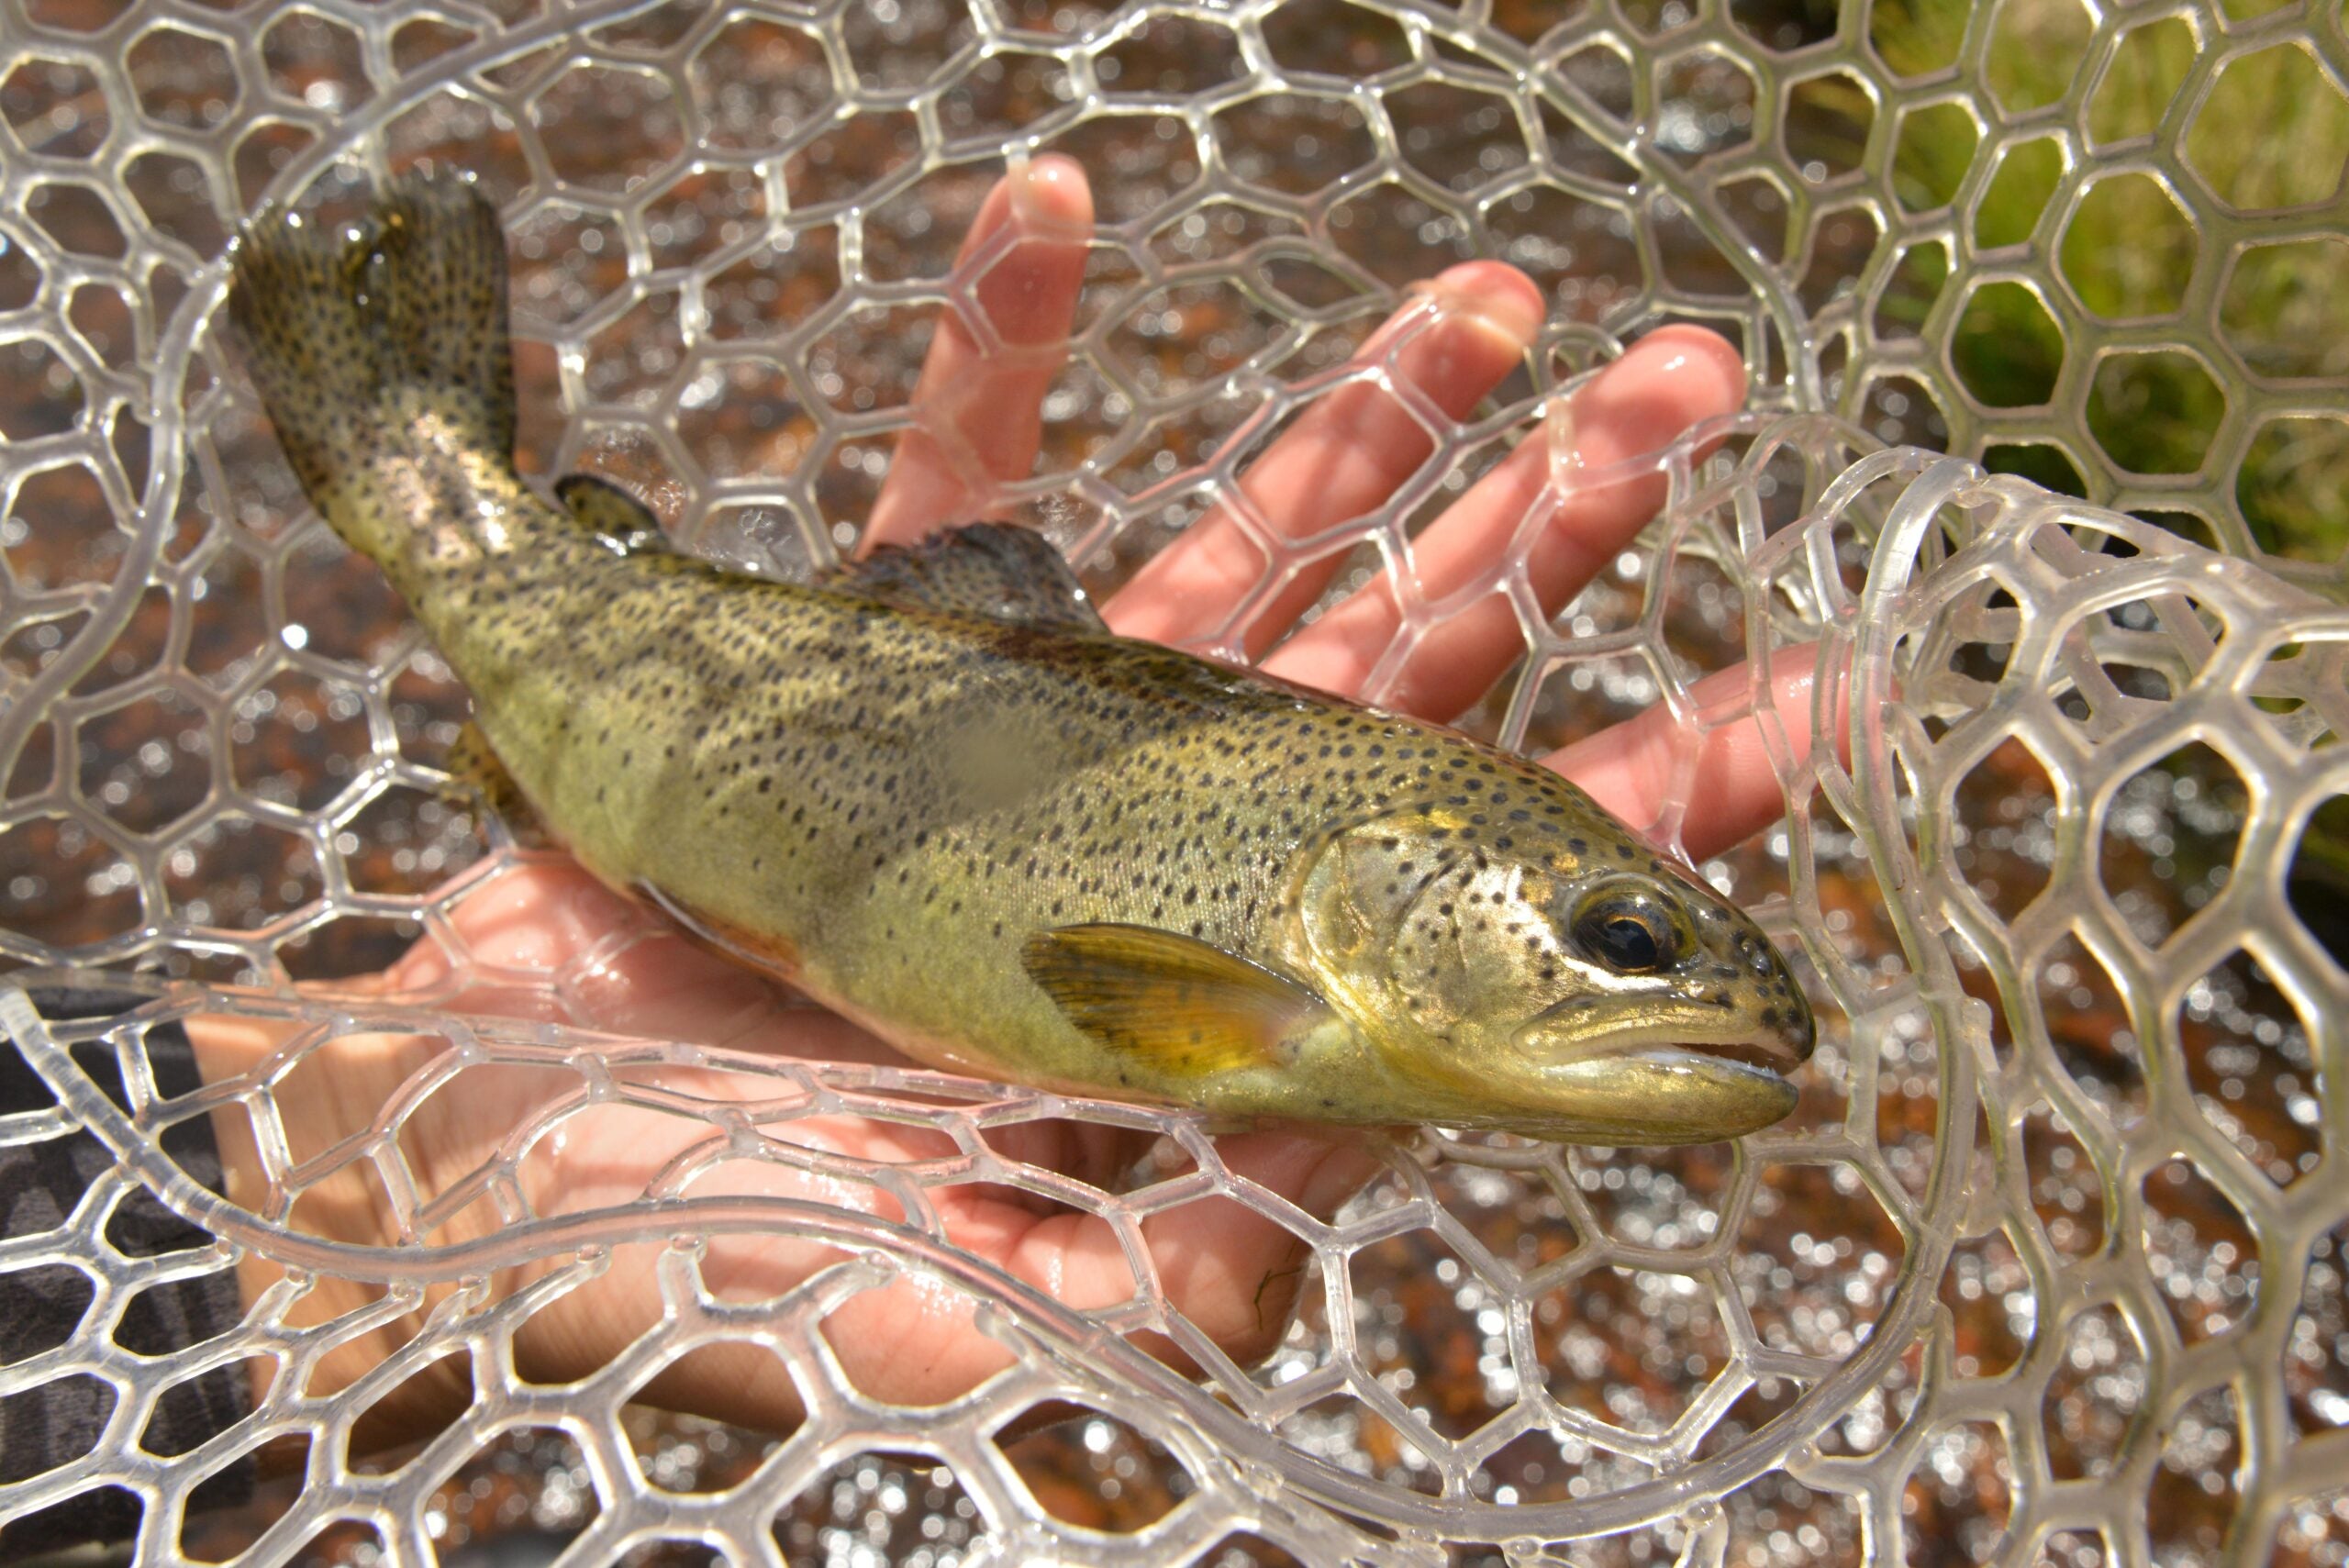 The USFWS recommends removing the Arizona Apache Trout from the endangered species list